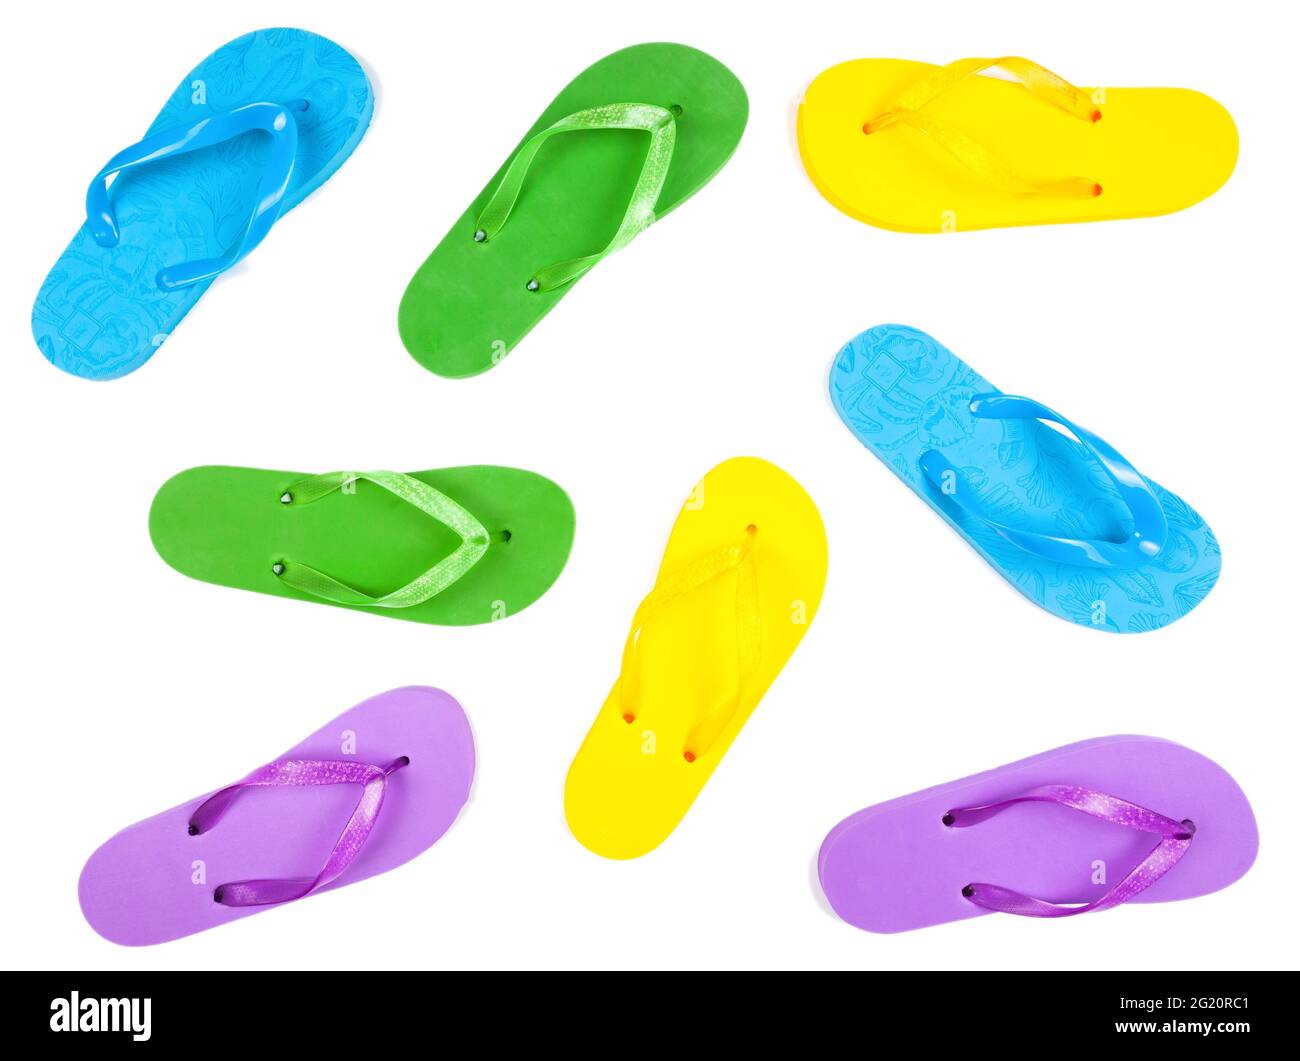 rubber flip flops of different colors on a white background, view from ...